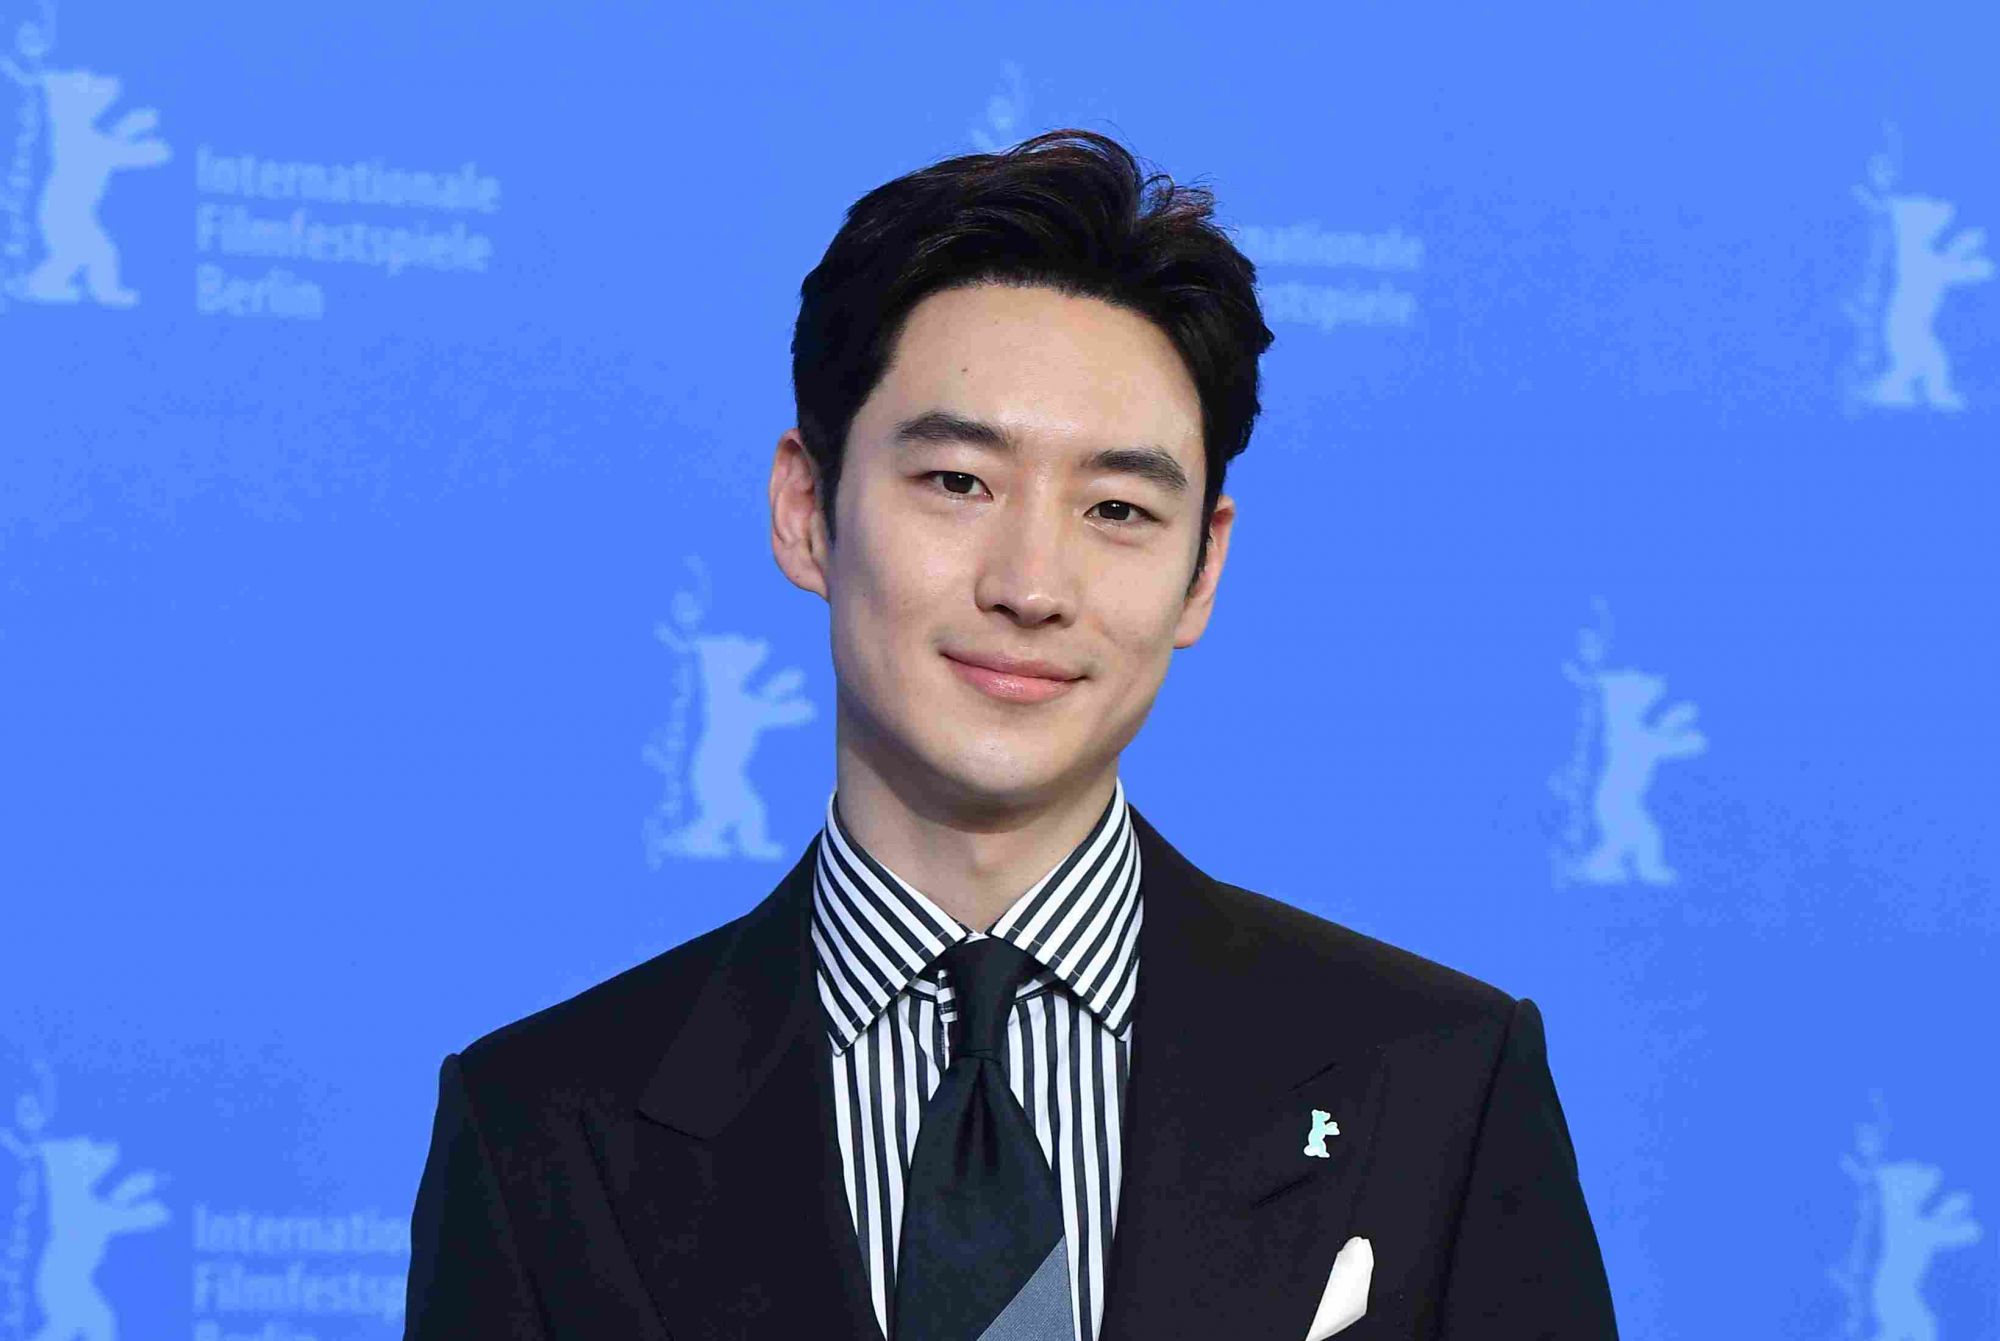 Lee Je Hoon Movies And Shows To Watch: Taxi Driver, Signal, And More